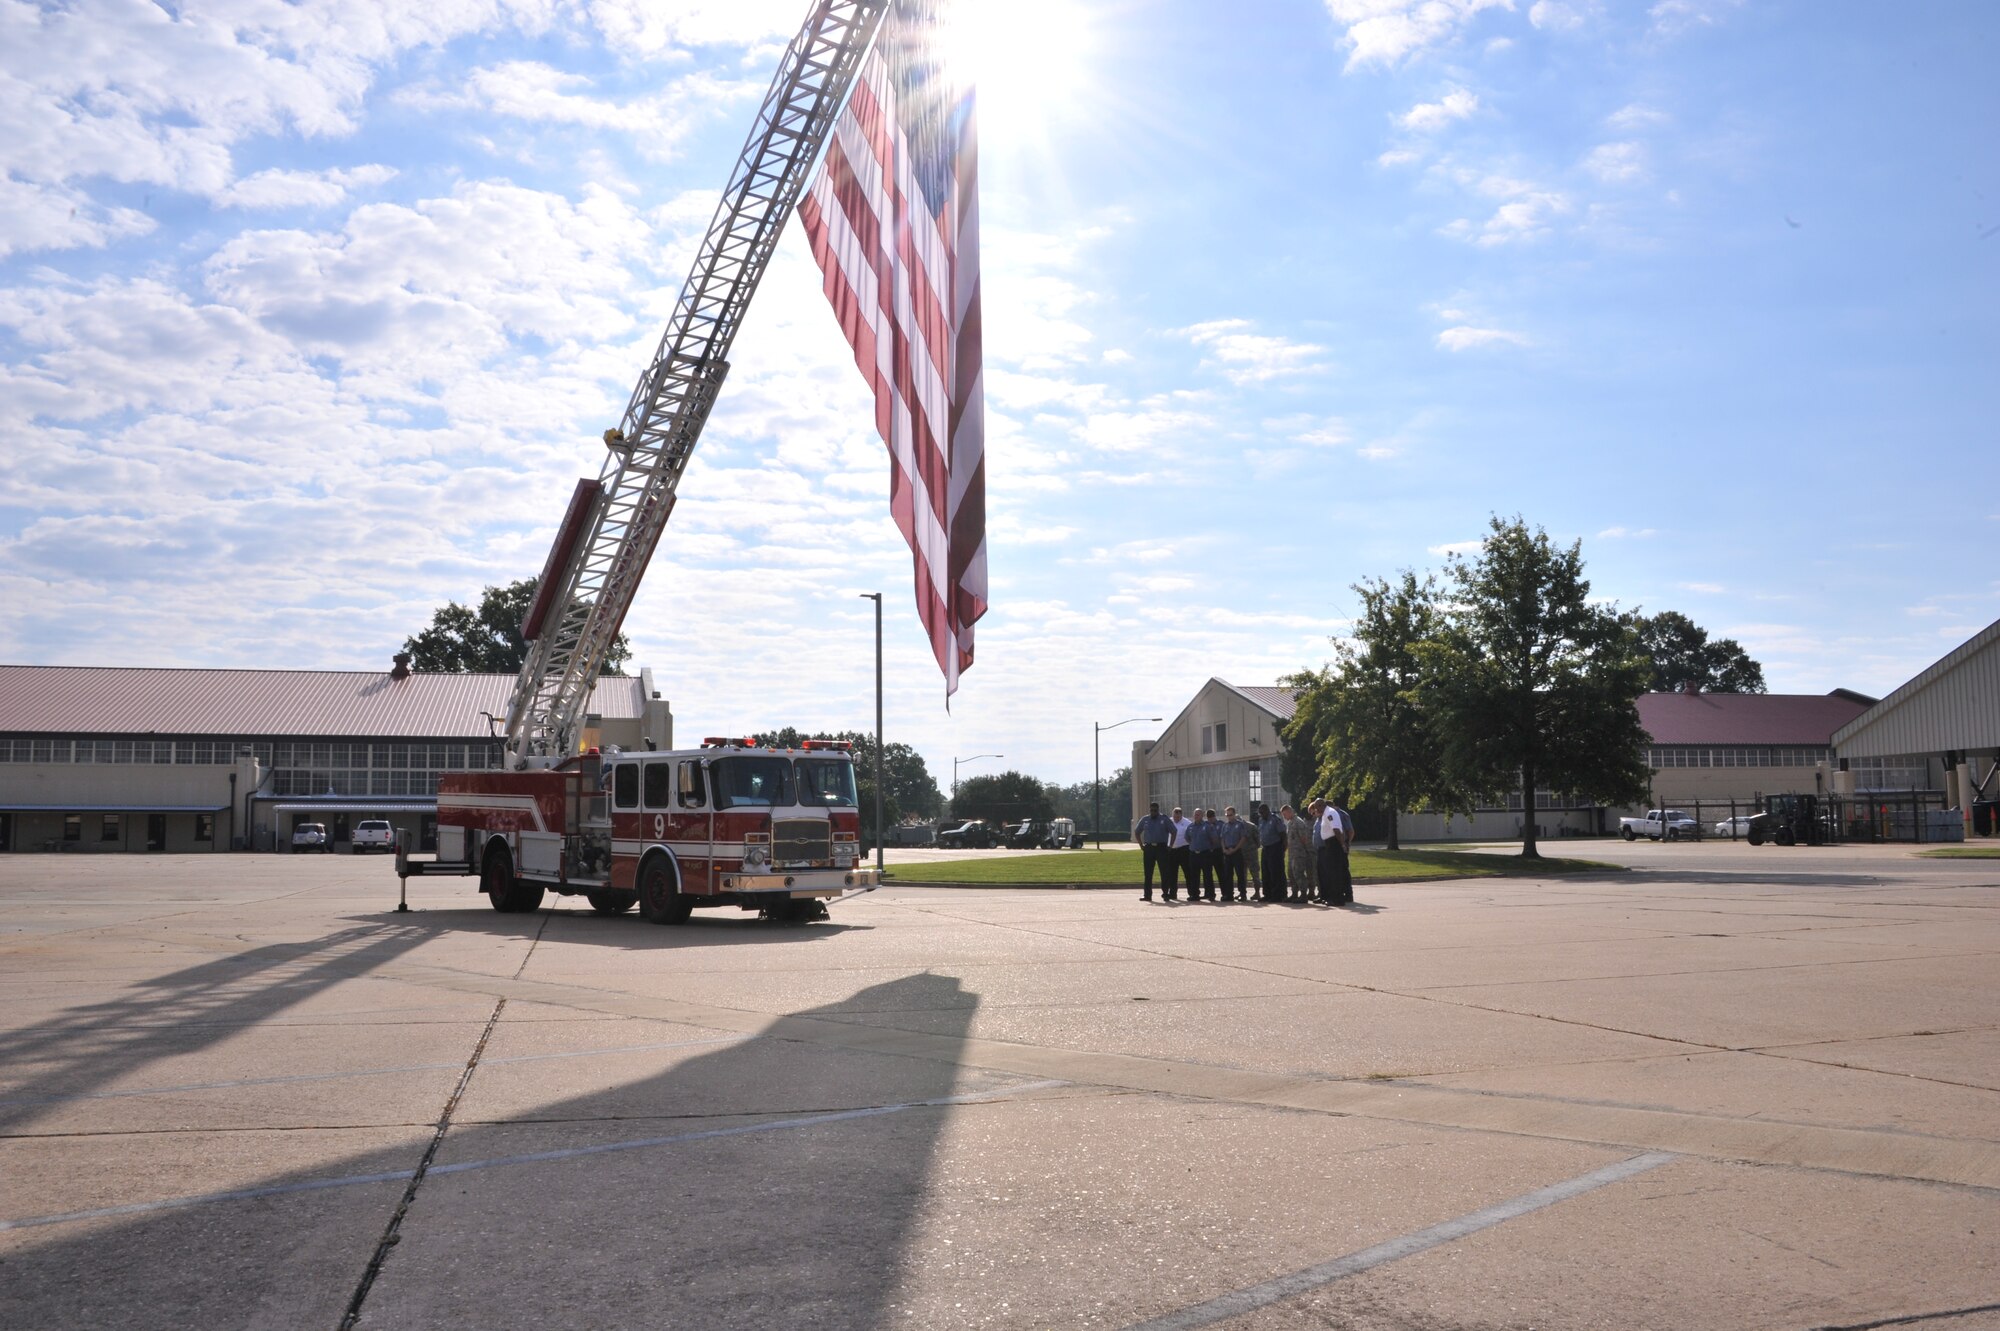 Maxwell Air Force Base Fire Department members gather around an American flag flown at half-staff to honor those to lost their lives 11 years ago, Sept. 11, 2001. Several members of the team spoke about their remembrance of the attack on America and the desire never to forget that moment in history. (U.S. Air Force photo by Airman 1st Class William Blankenship) 